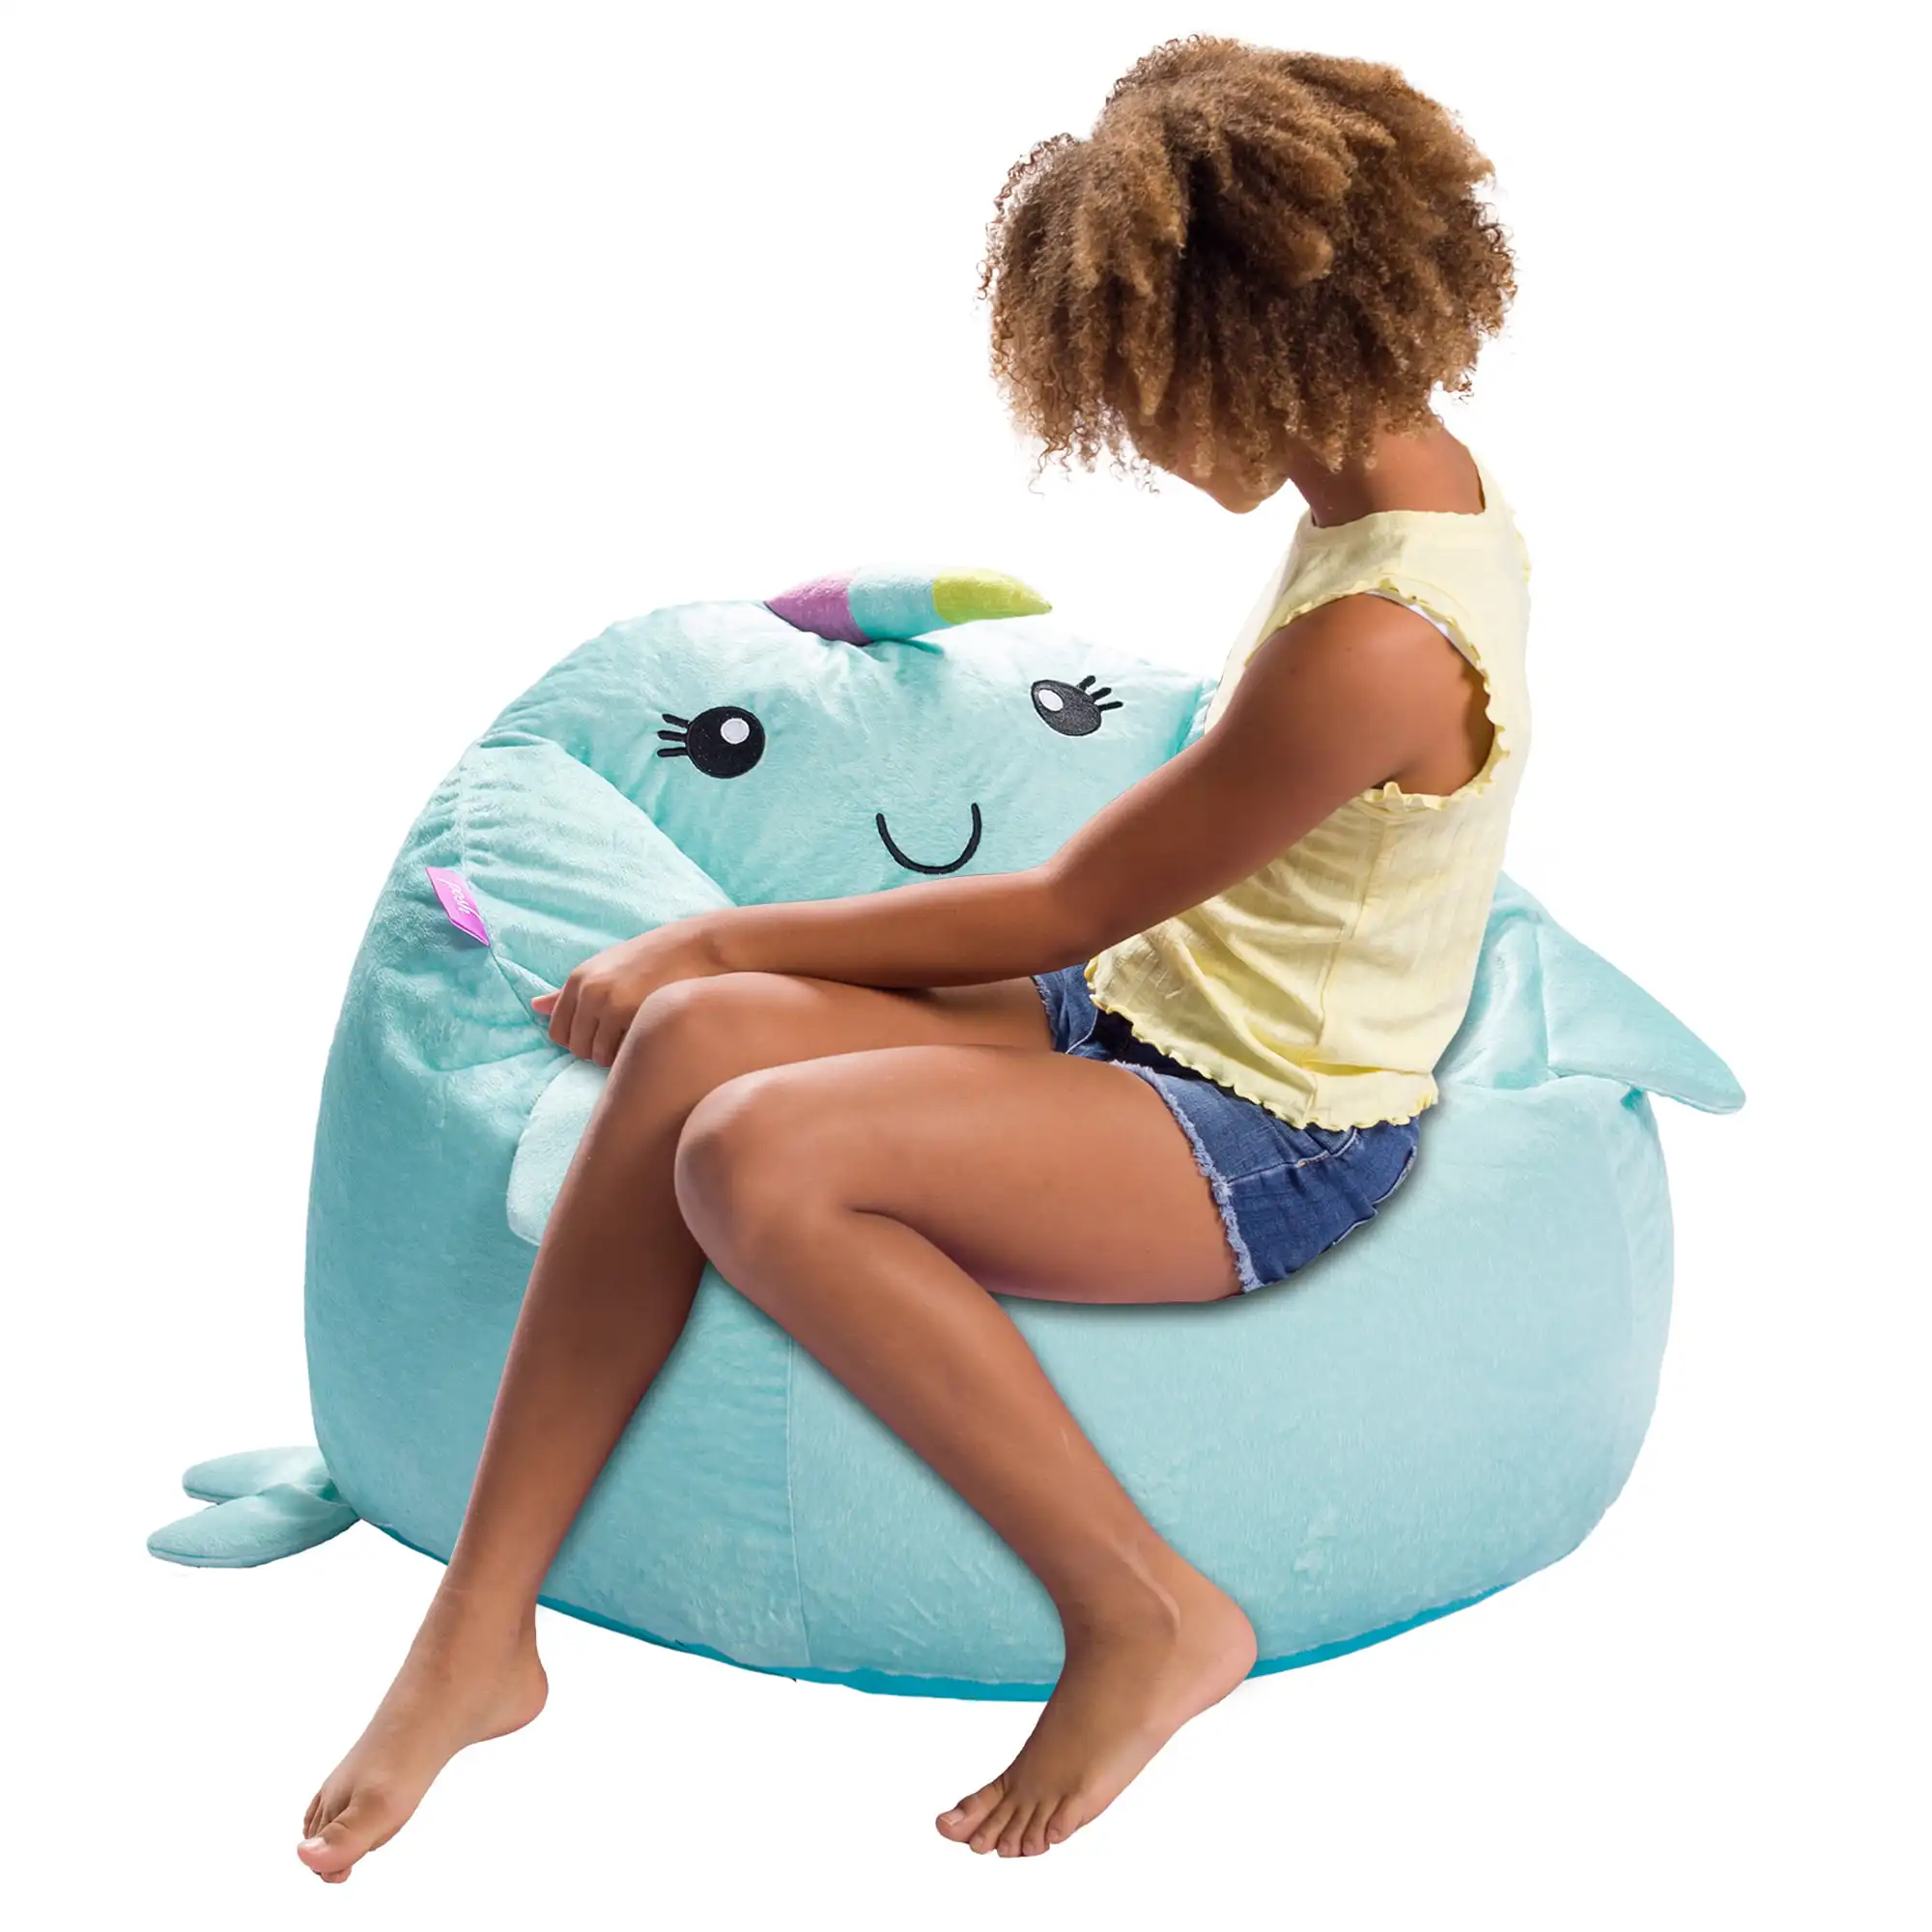 

Posh Creations Bean Bag Chair, Memory Foam Lounger with Soft Cover, Kids, 2.5 ft, Blue Narwhal